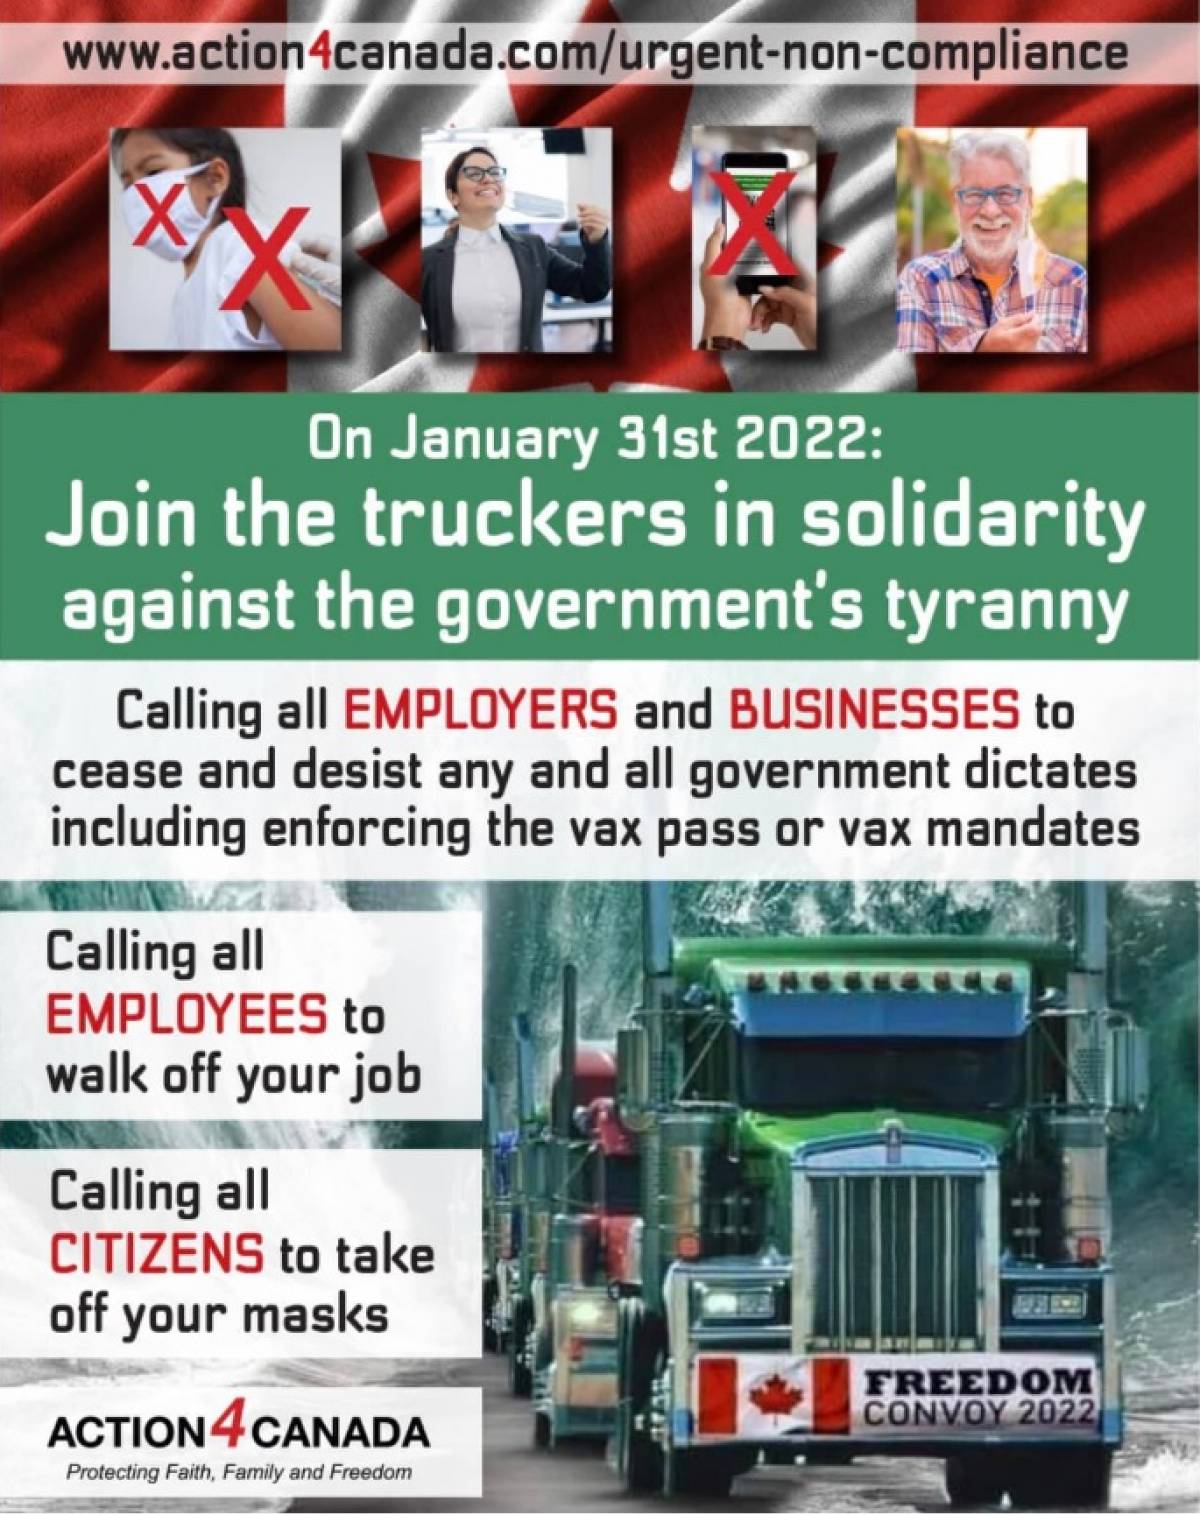 action4canada-freedom_convoy_2022_poster.jpg